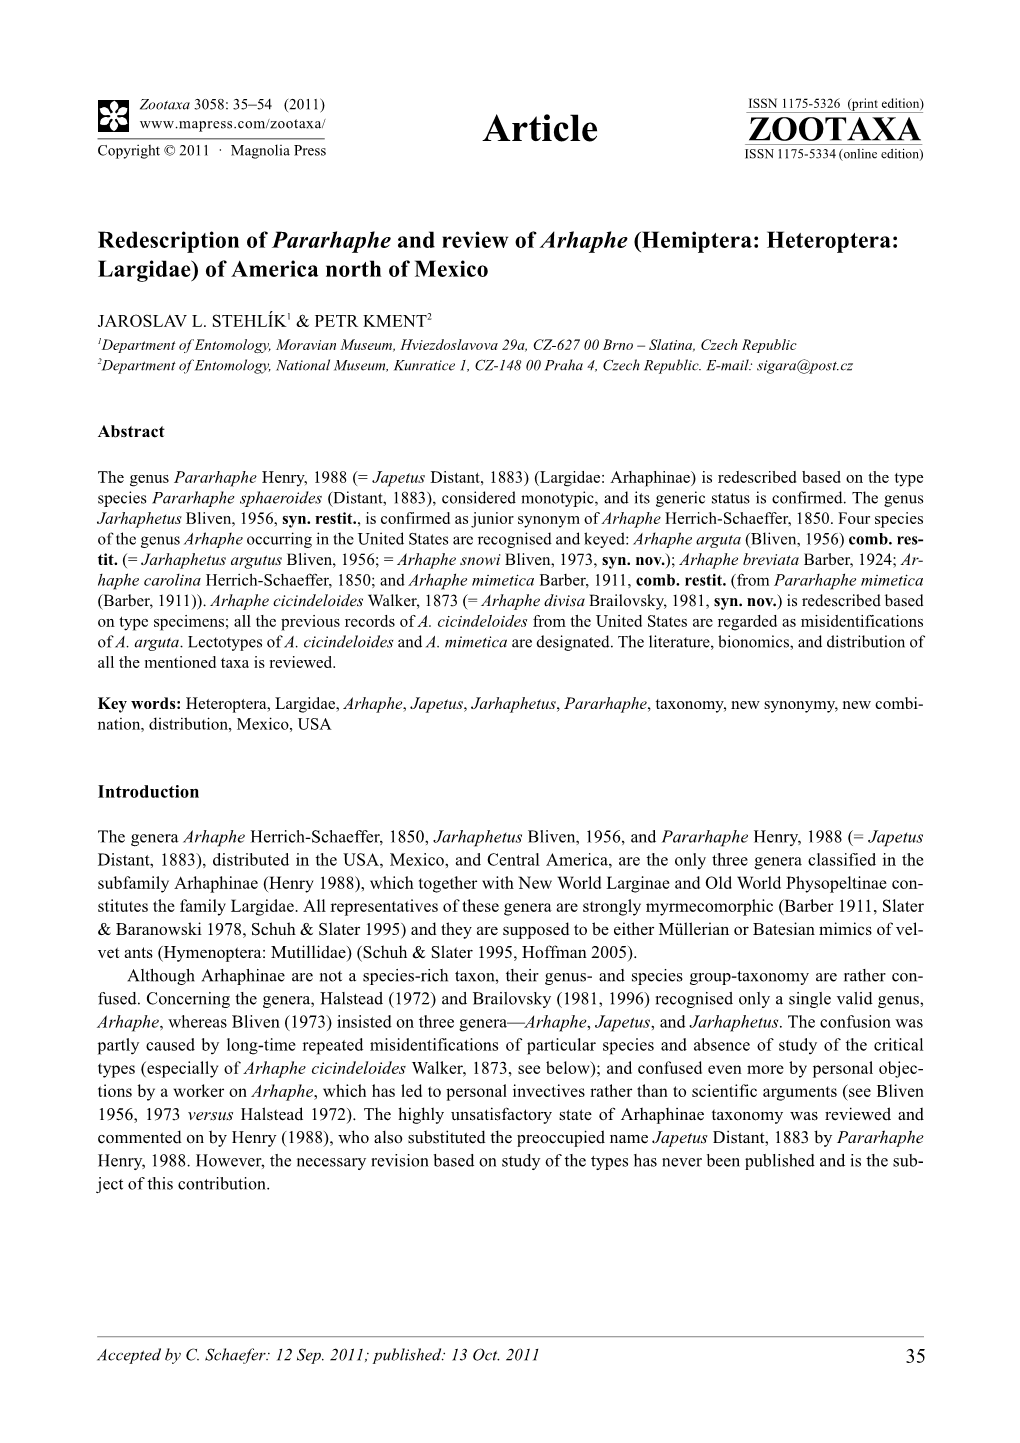 Redescription of Pararhaphe and Review of Arhaphe (Hemiptera: Heteroptera: Largidae) of America North of Mexico